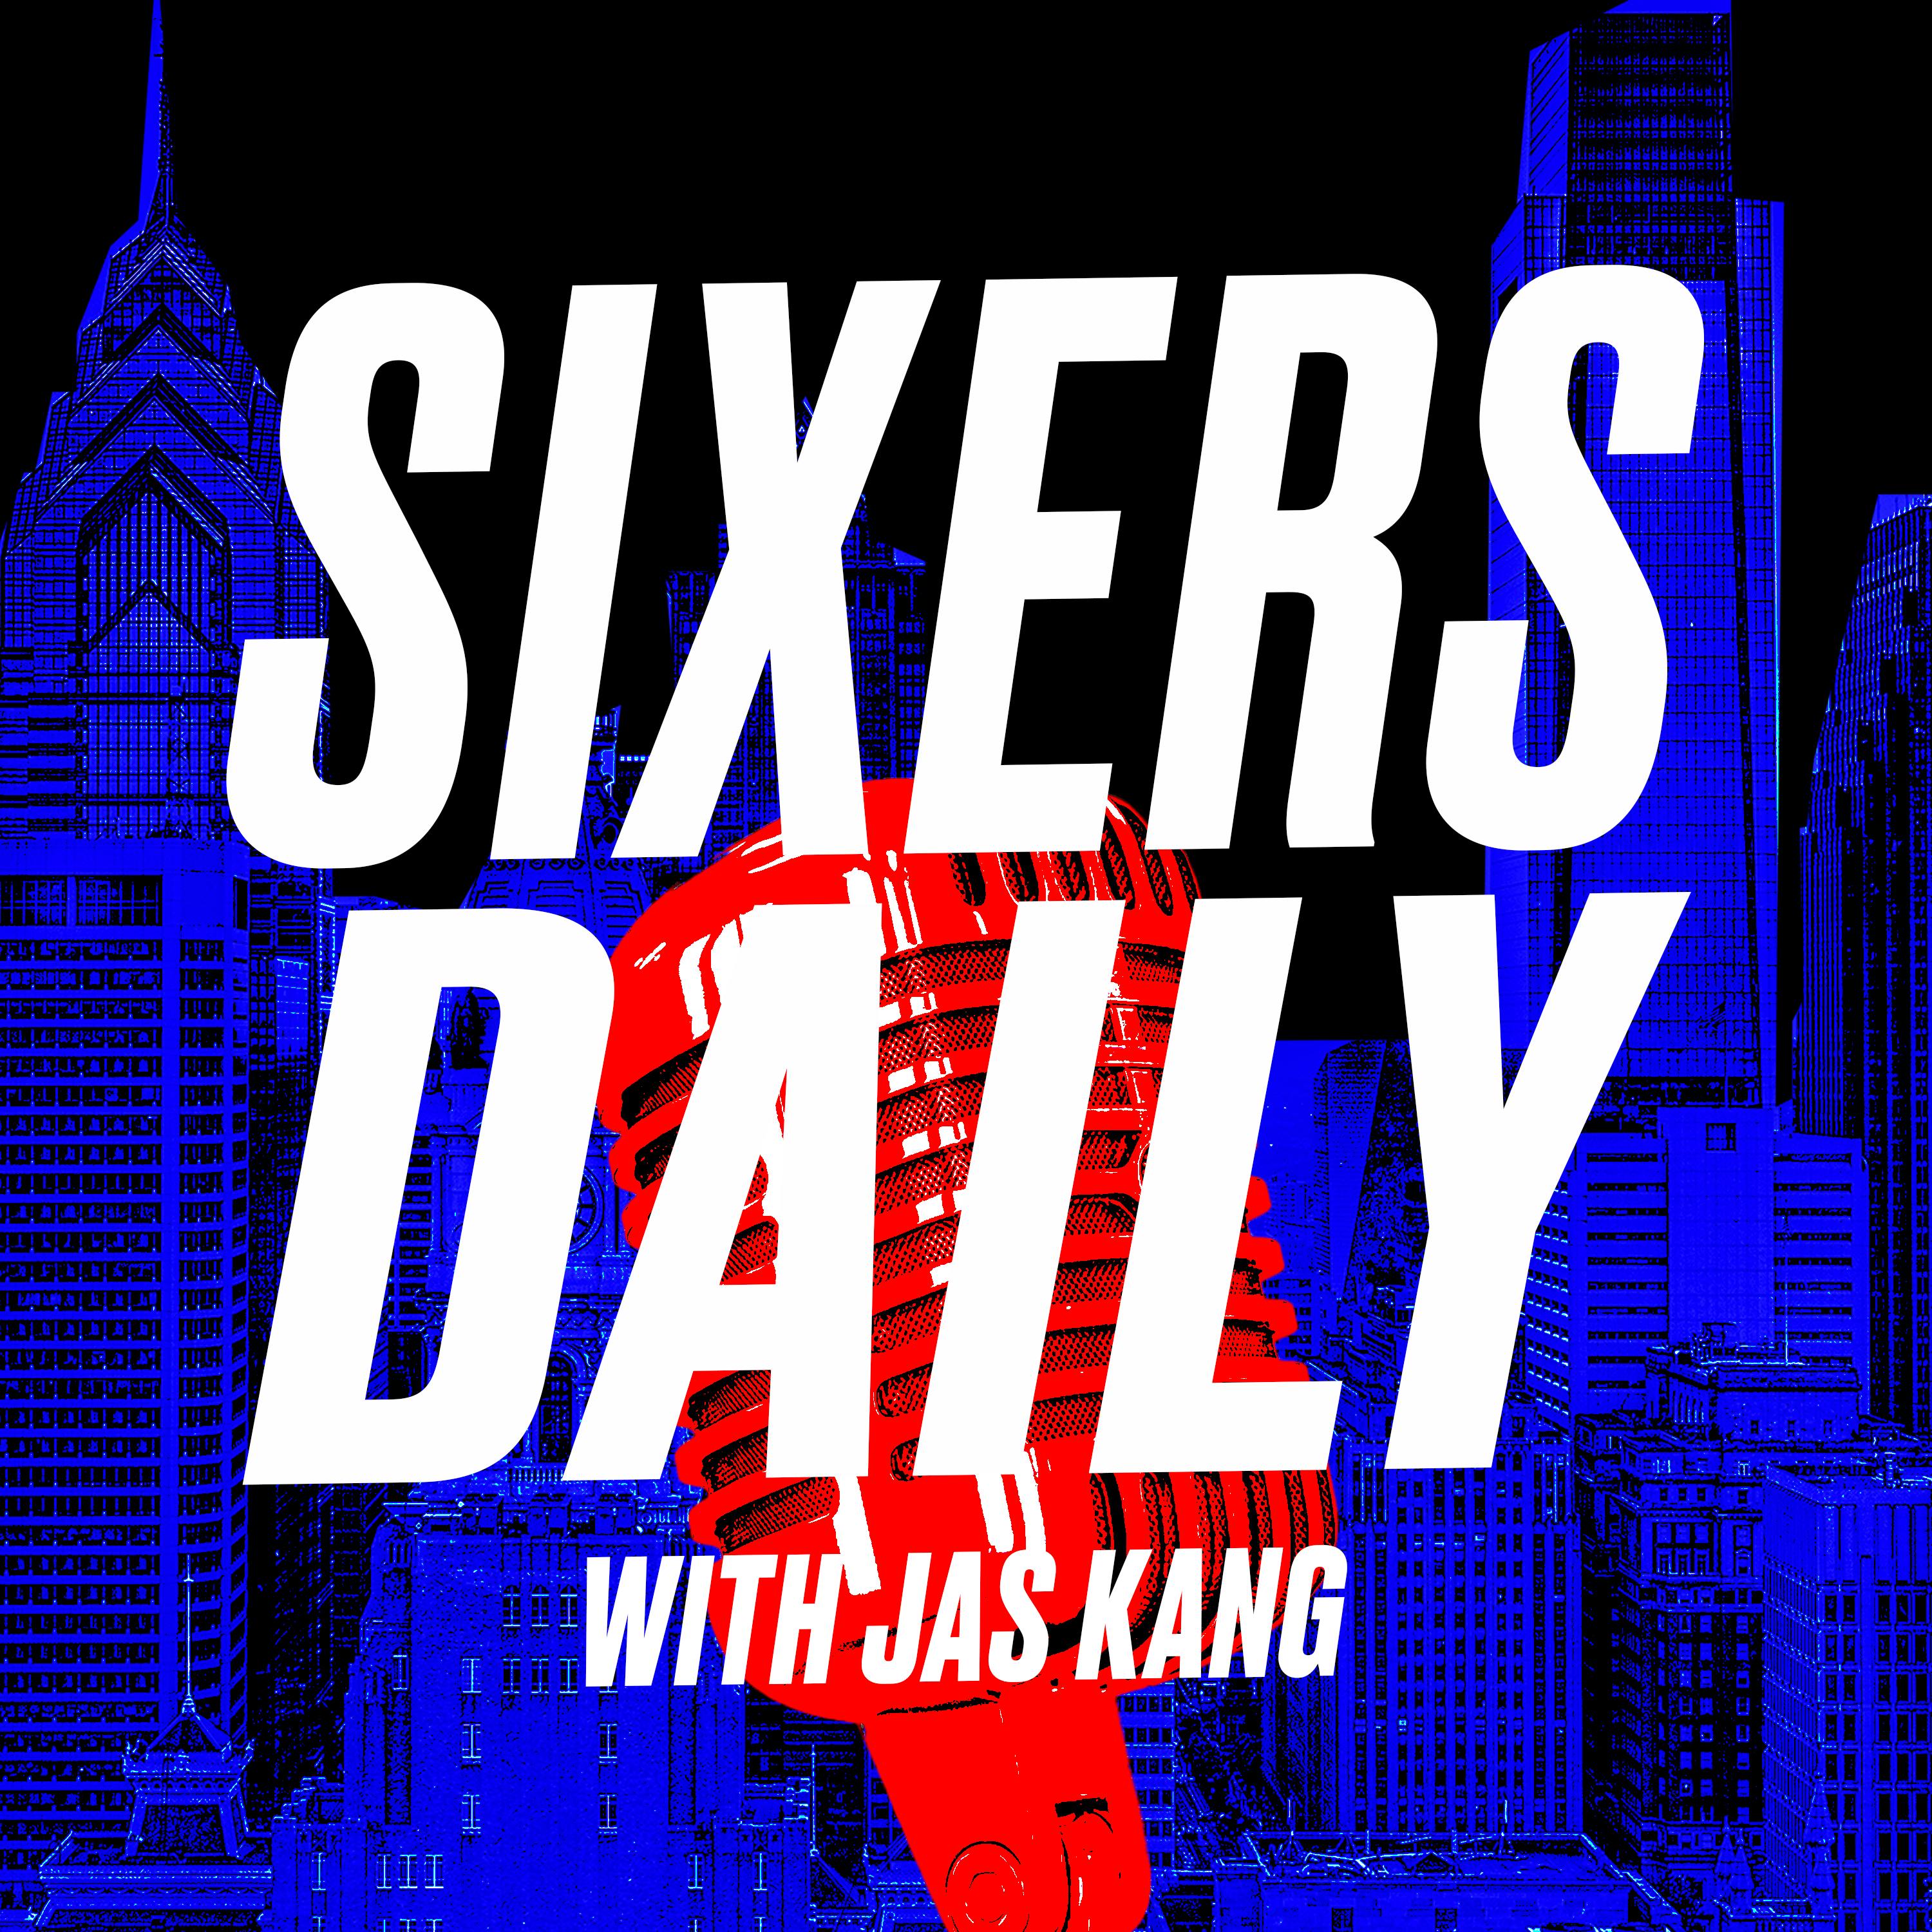 Sixers Daily with Jas Kang - Tyrese Maxey's potential, Daryl Morey's offseason, expectations for next season, The Process years and more with Josh Reynolds